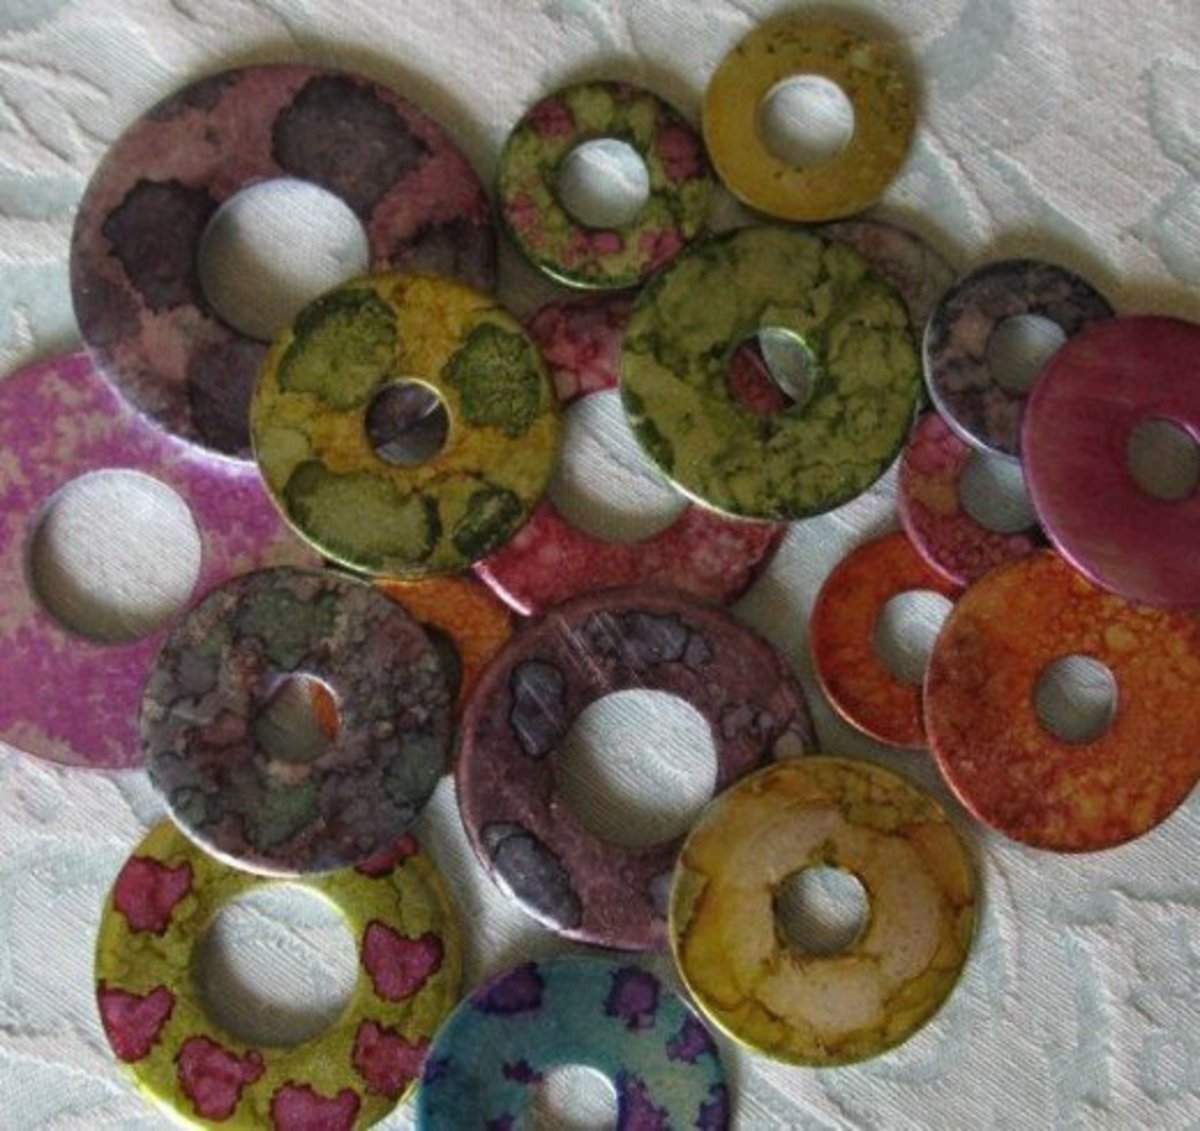 Here are more finished metal washers ready for alcohol ink projects!